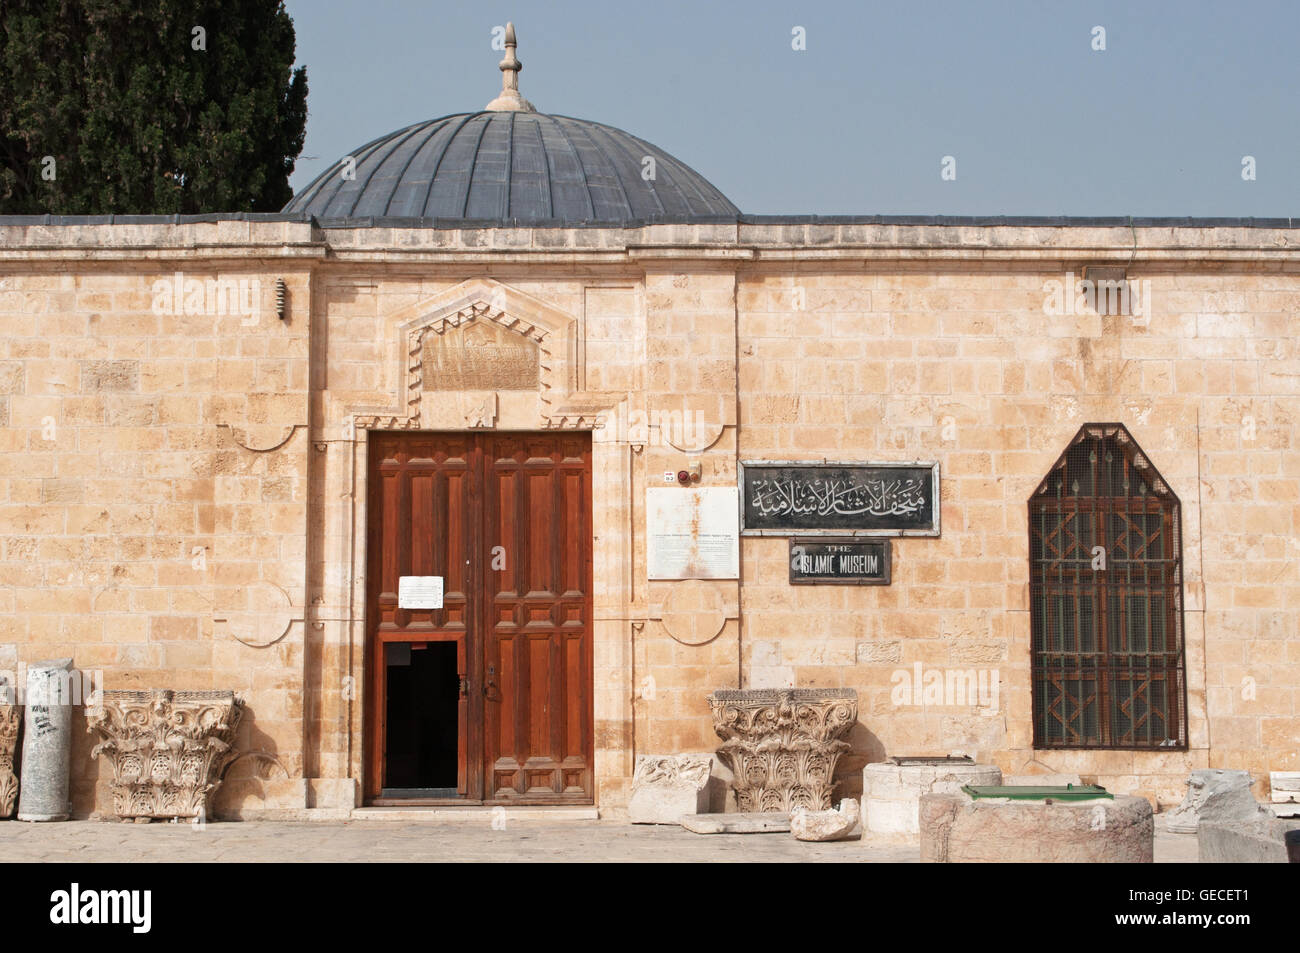 Jerusalem, Old City, Israel, Middle East: the Islamic Museum on the Temple Mount, near Al Aqsa Mosque, displaying exhibits from Islamic history Stock Photo